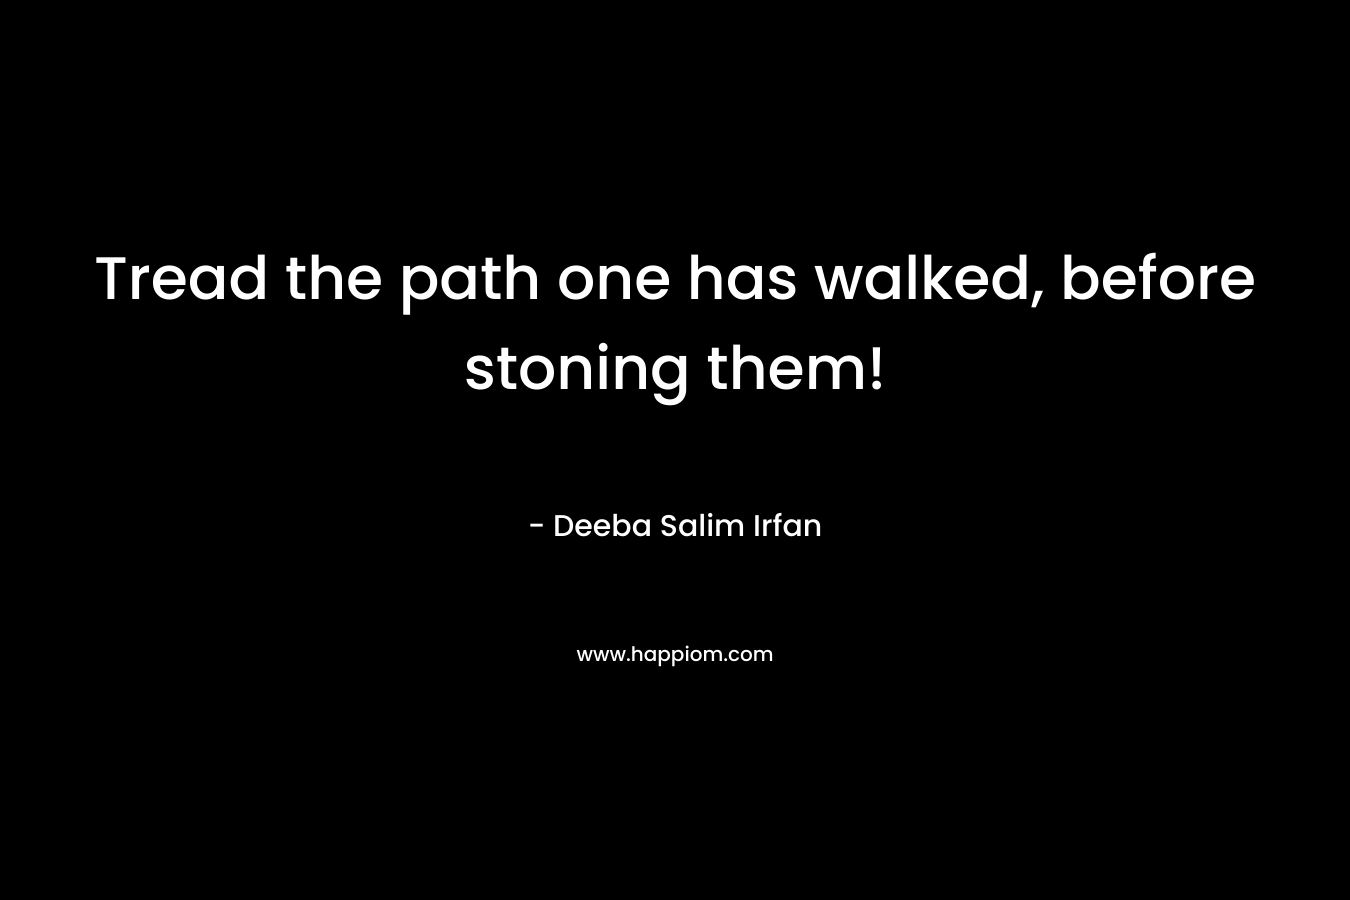 Tread the path one has walked, before stoning them!